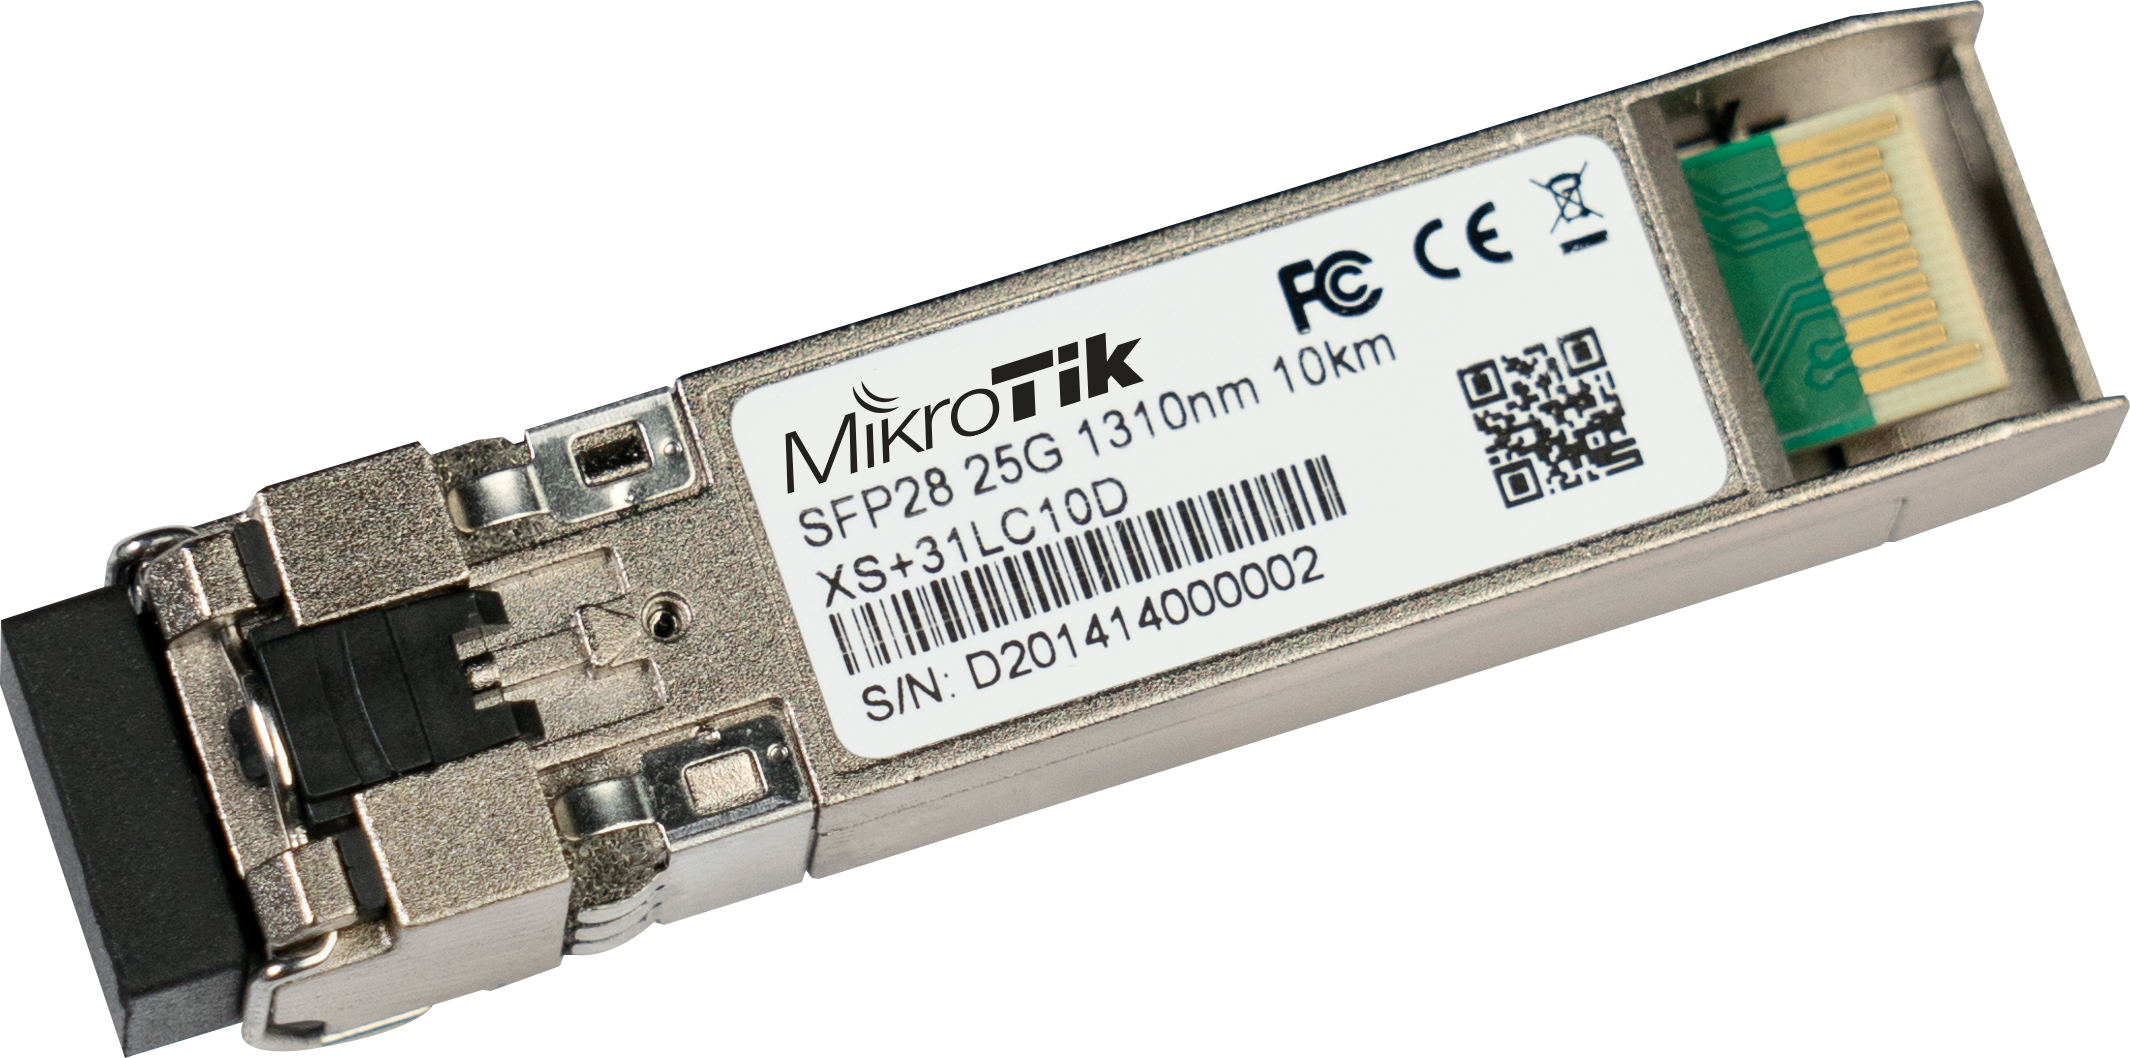 MikroTik Routers and Wireless - Products: XS+31LC10D